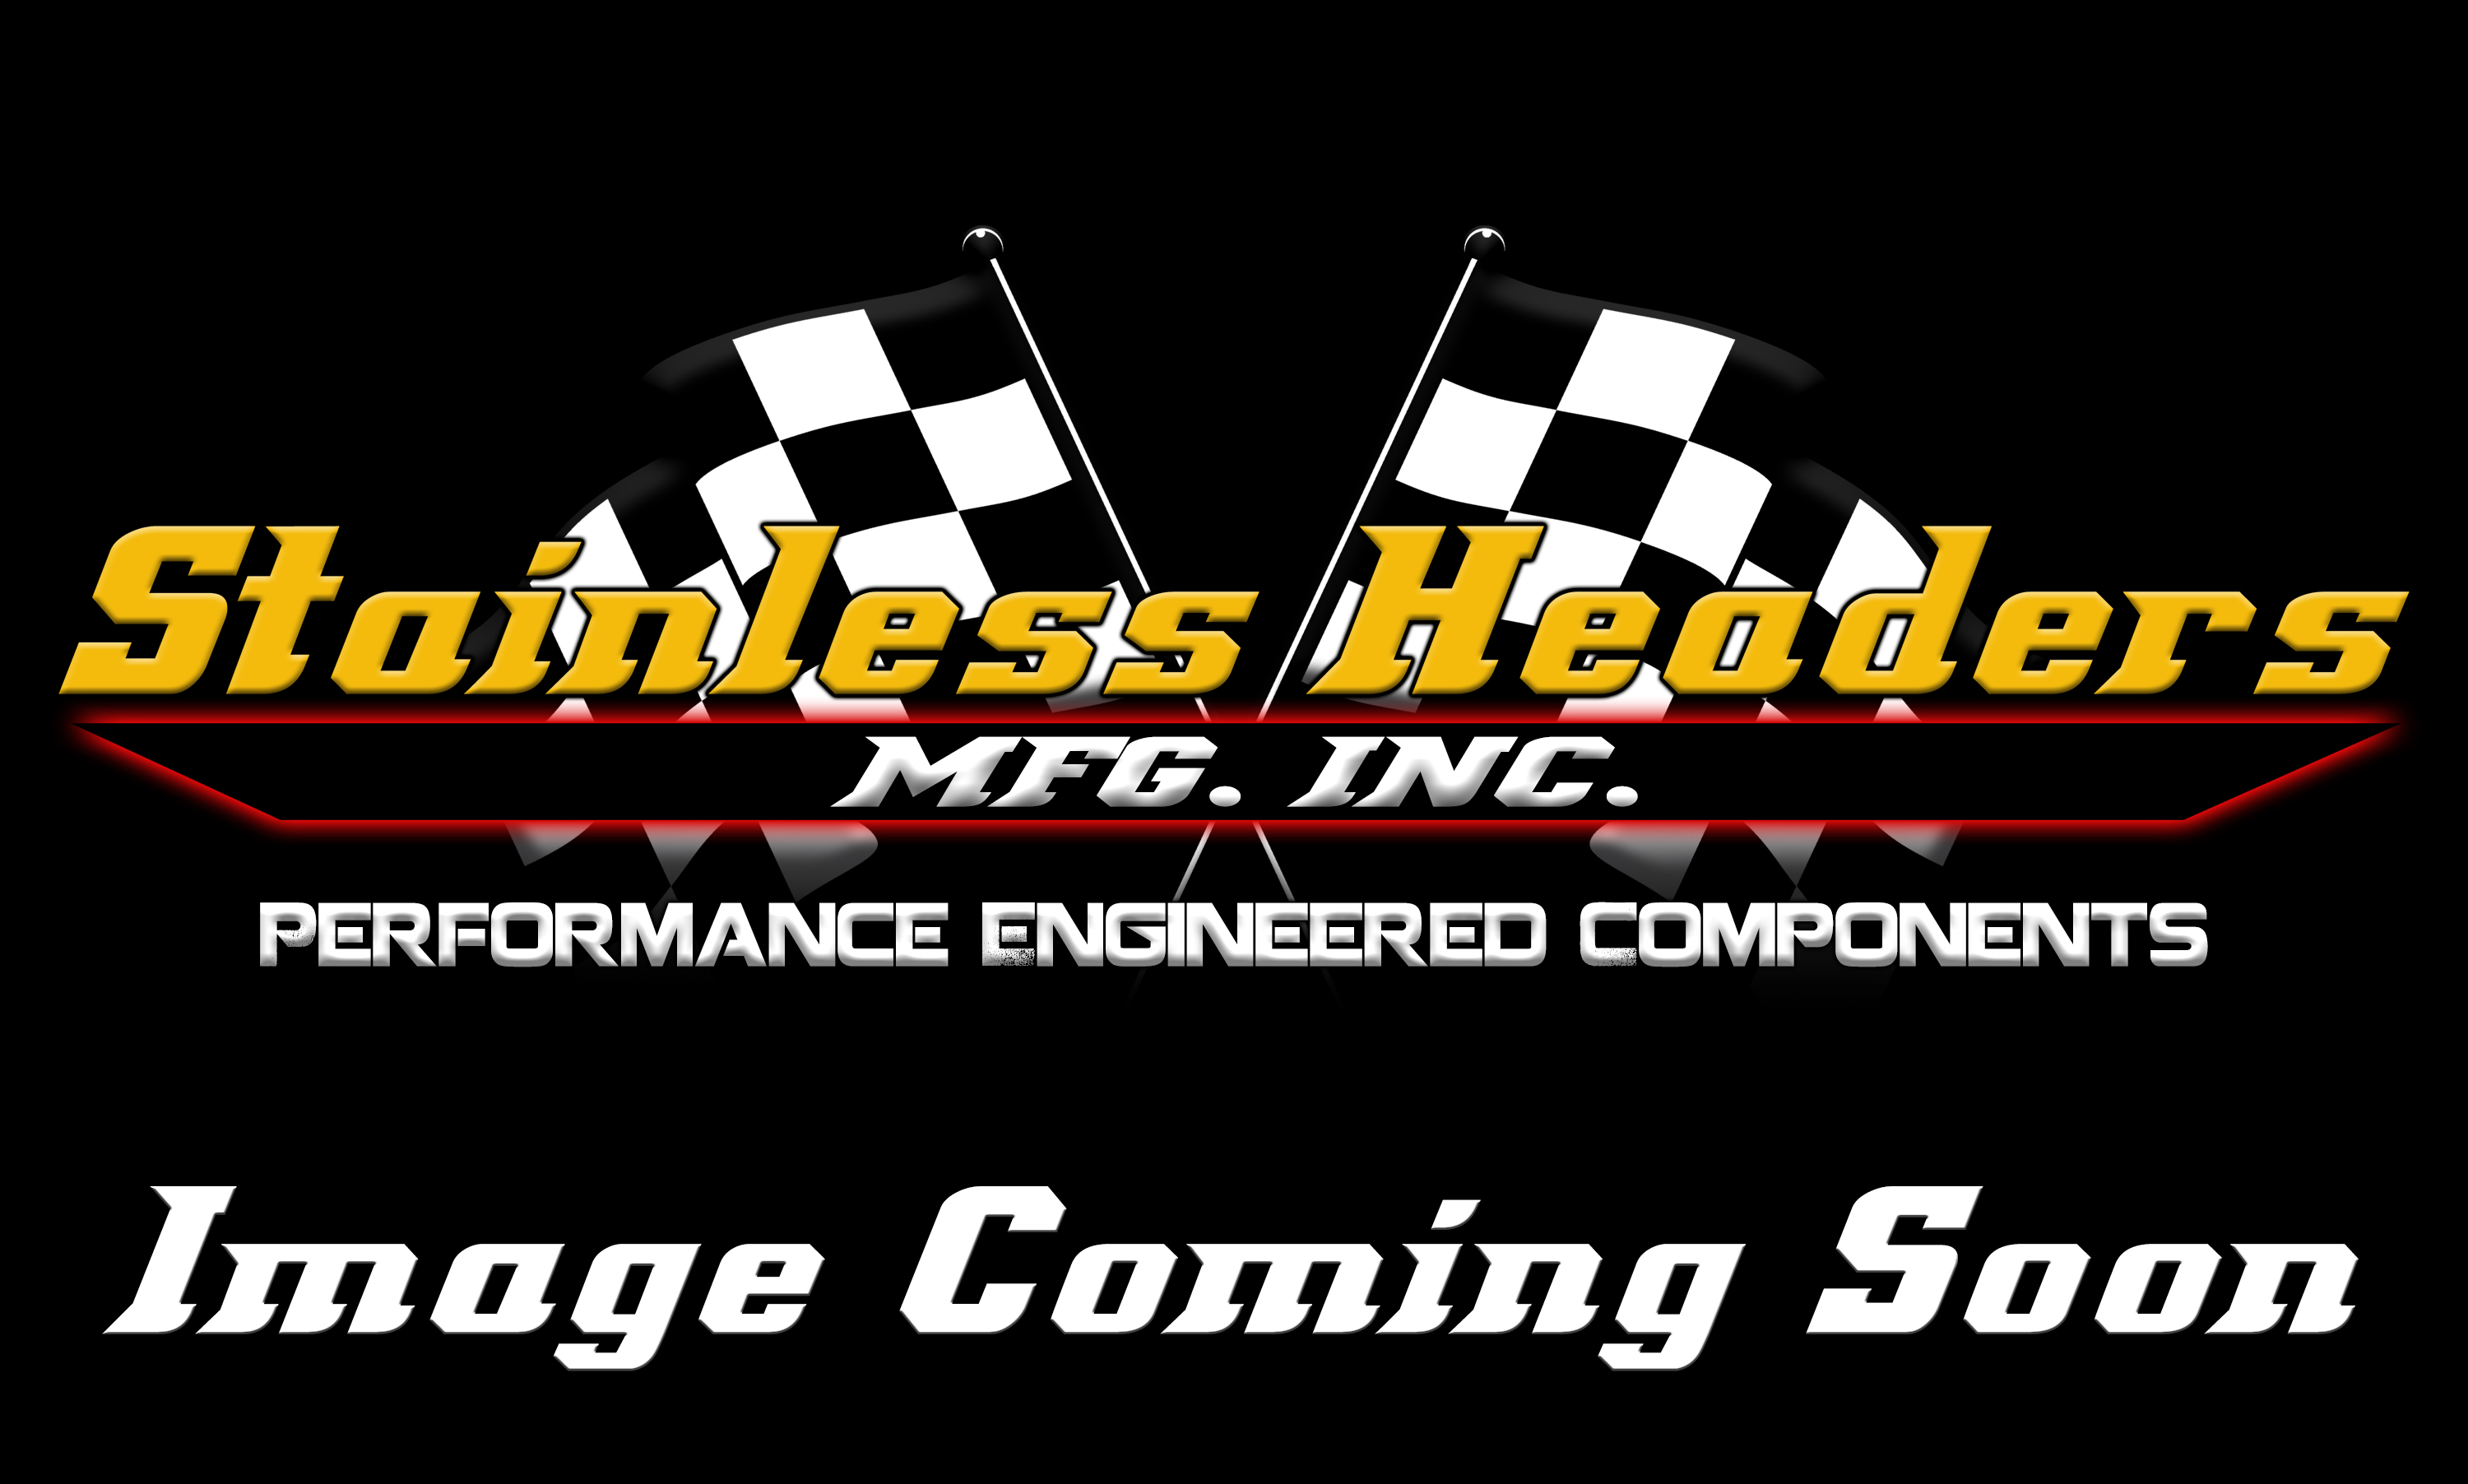 CompTurbo Technology Turbochargers - Comp Turbo Journal Bearing Turbochargers - CompTurbo Technologies - CTR4818R-8090 Mid Frame 360 Journal Bearing Turbocharger (1350 HP)